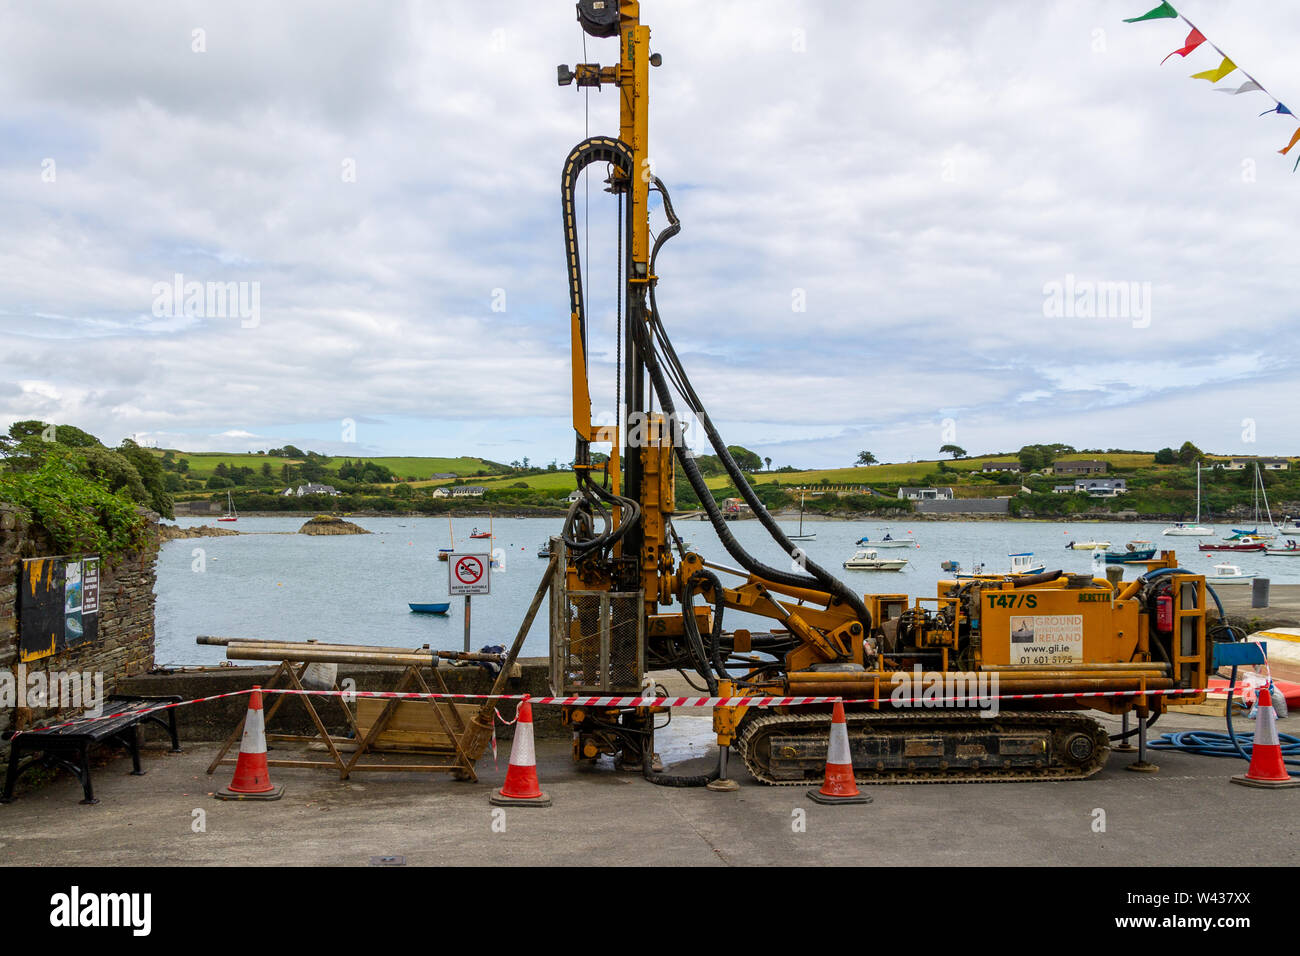 Mobile land drilling rig taking core samples. Stock Photo